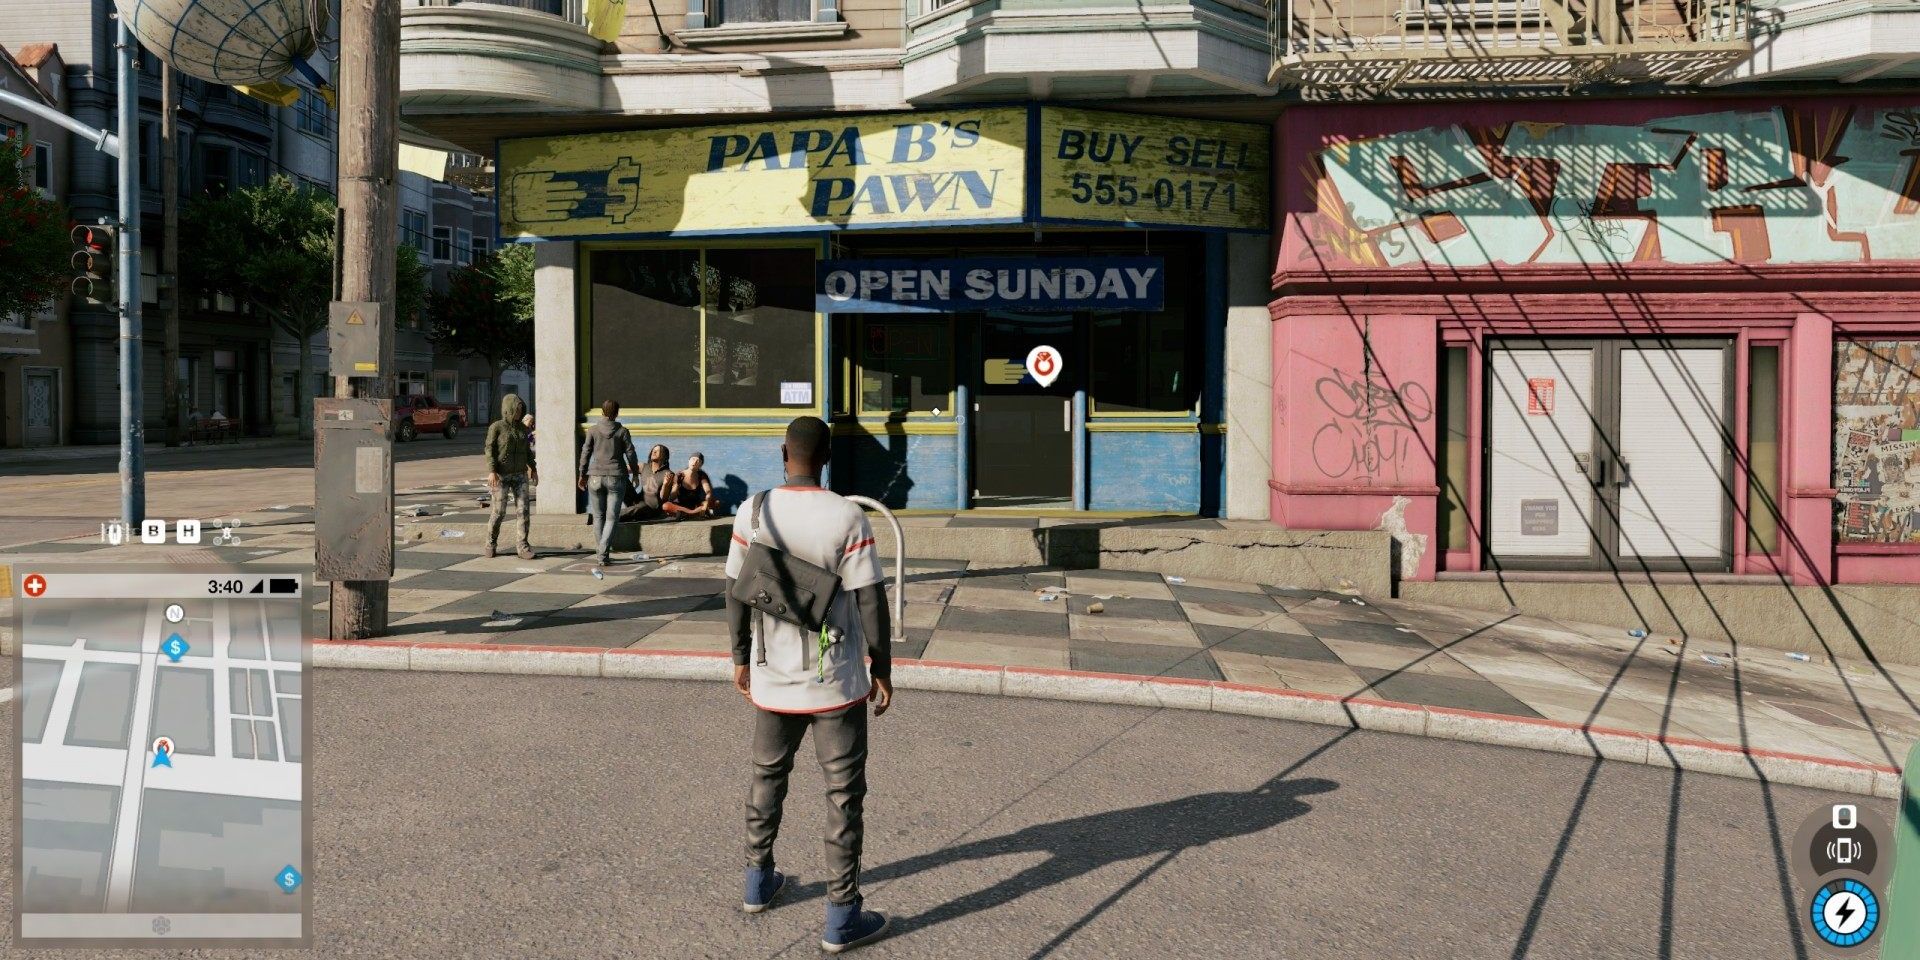 Papa B's Pawn Shop in Watch Dogs 2